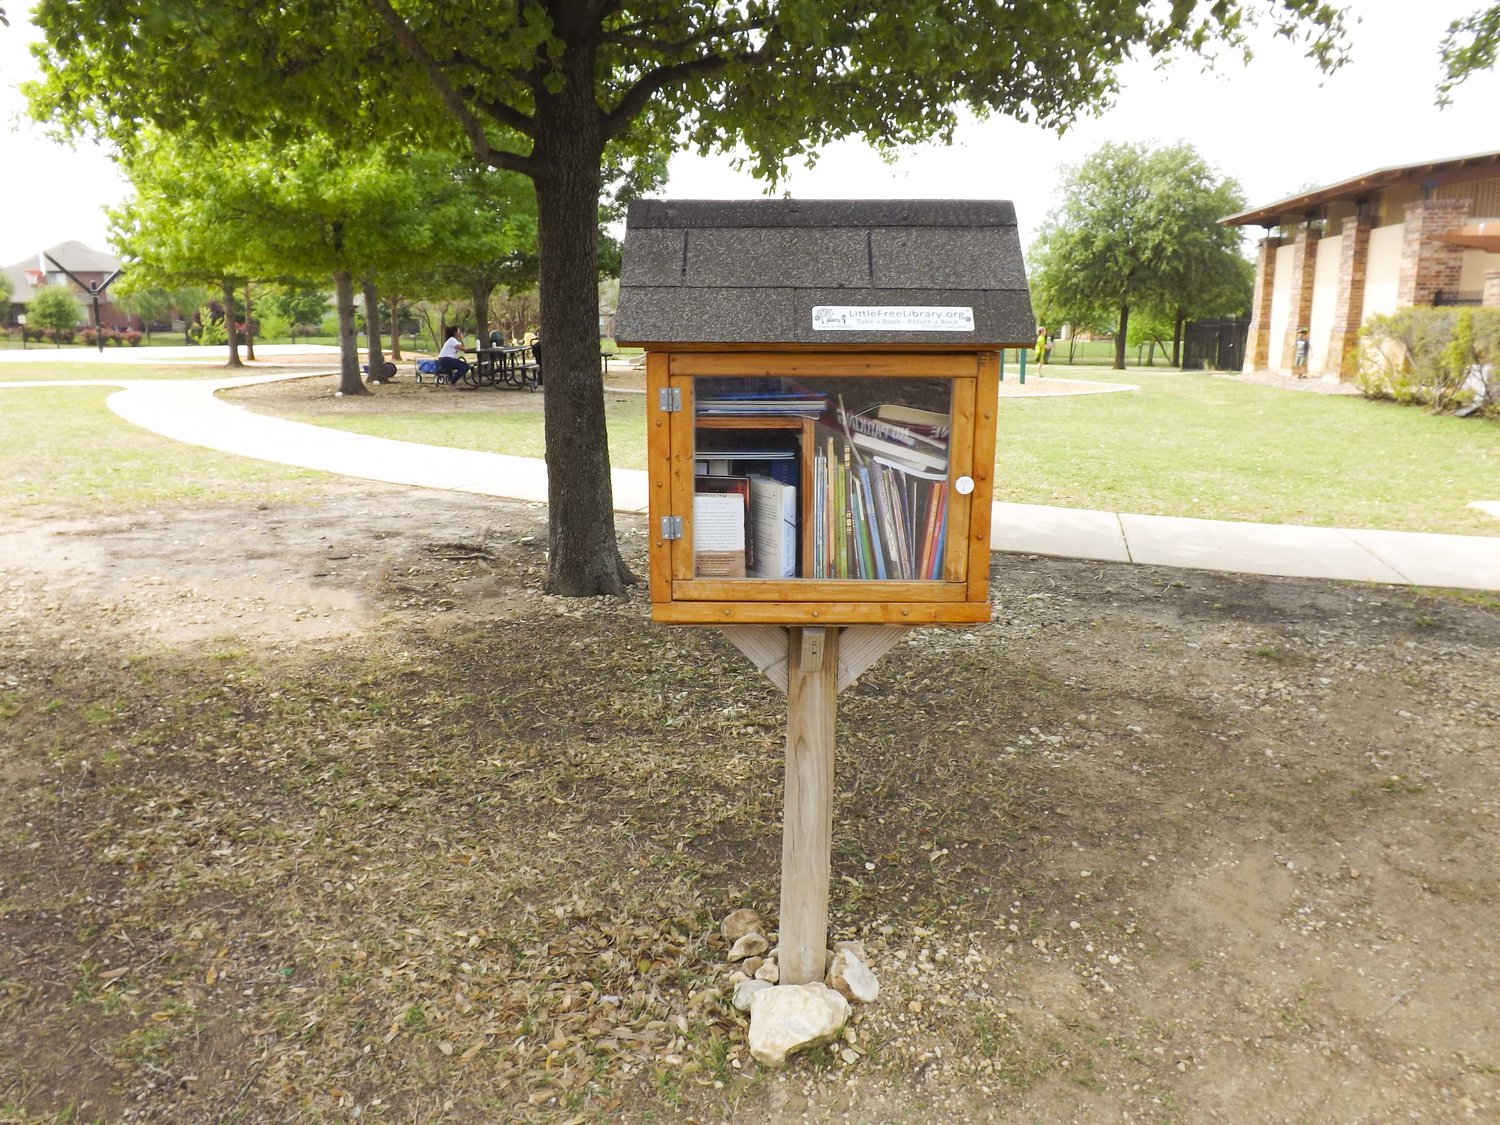 Little Library. Leave a book, take a book!